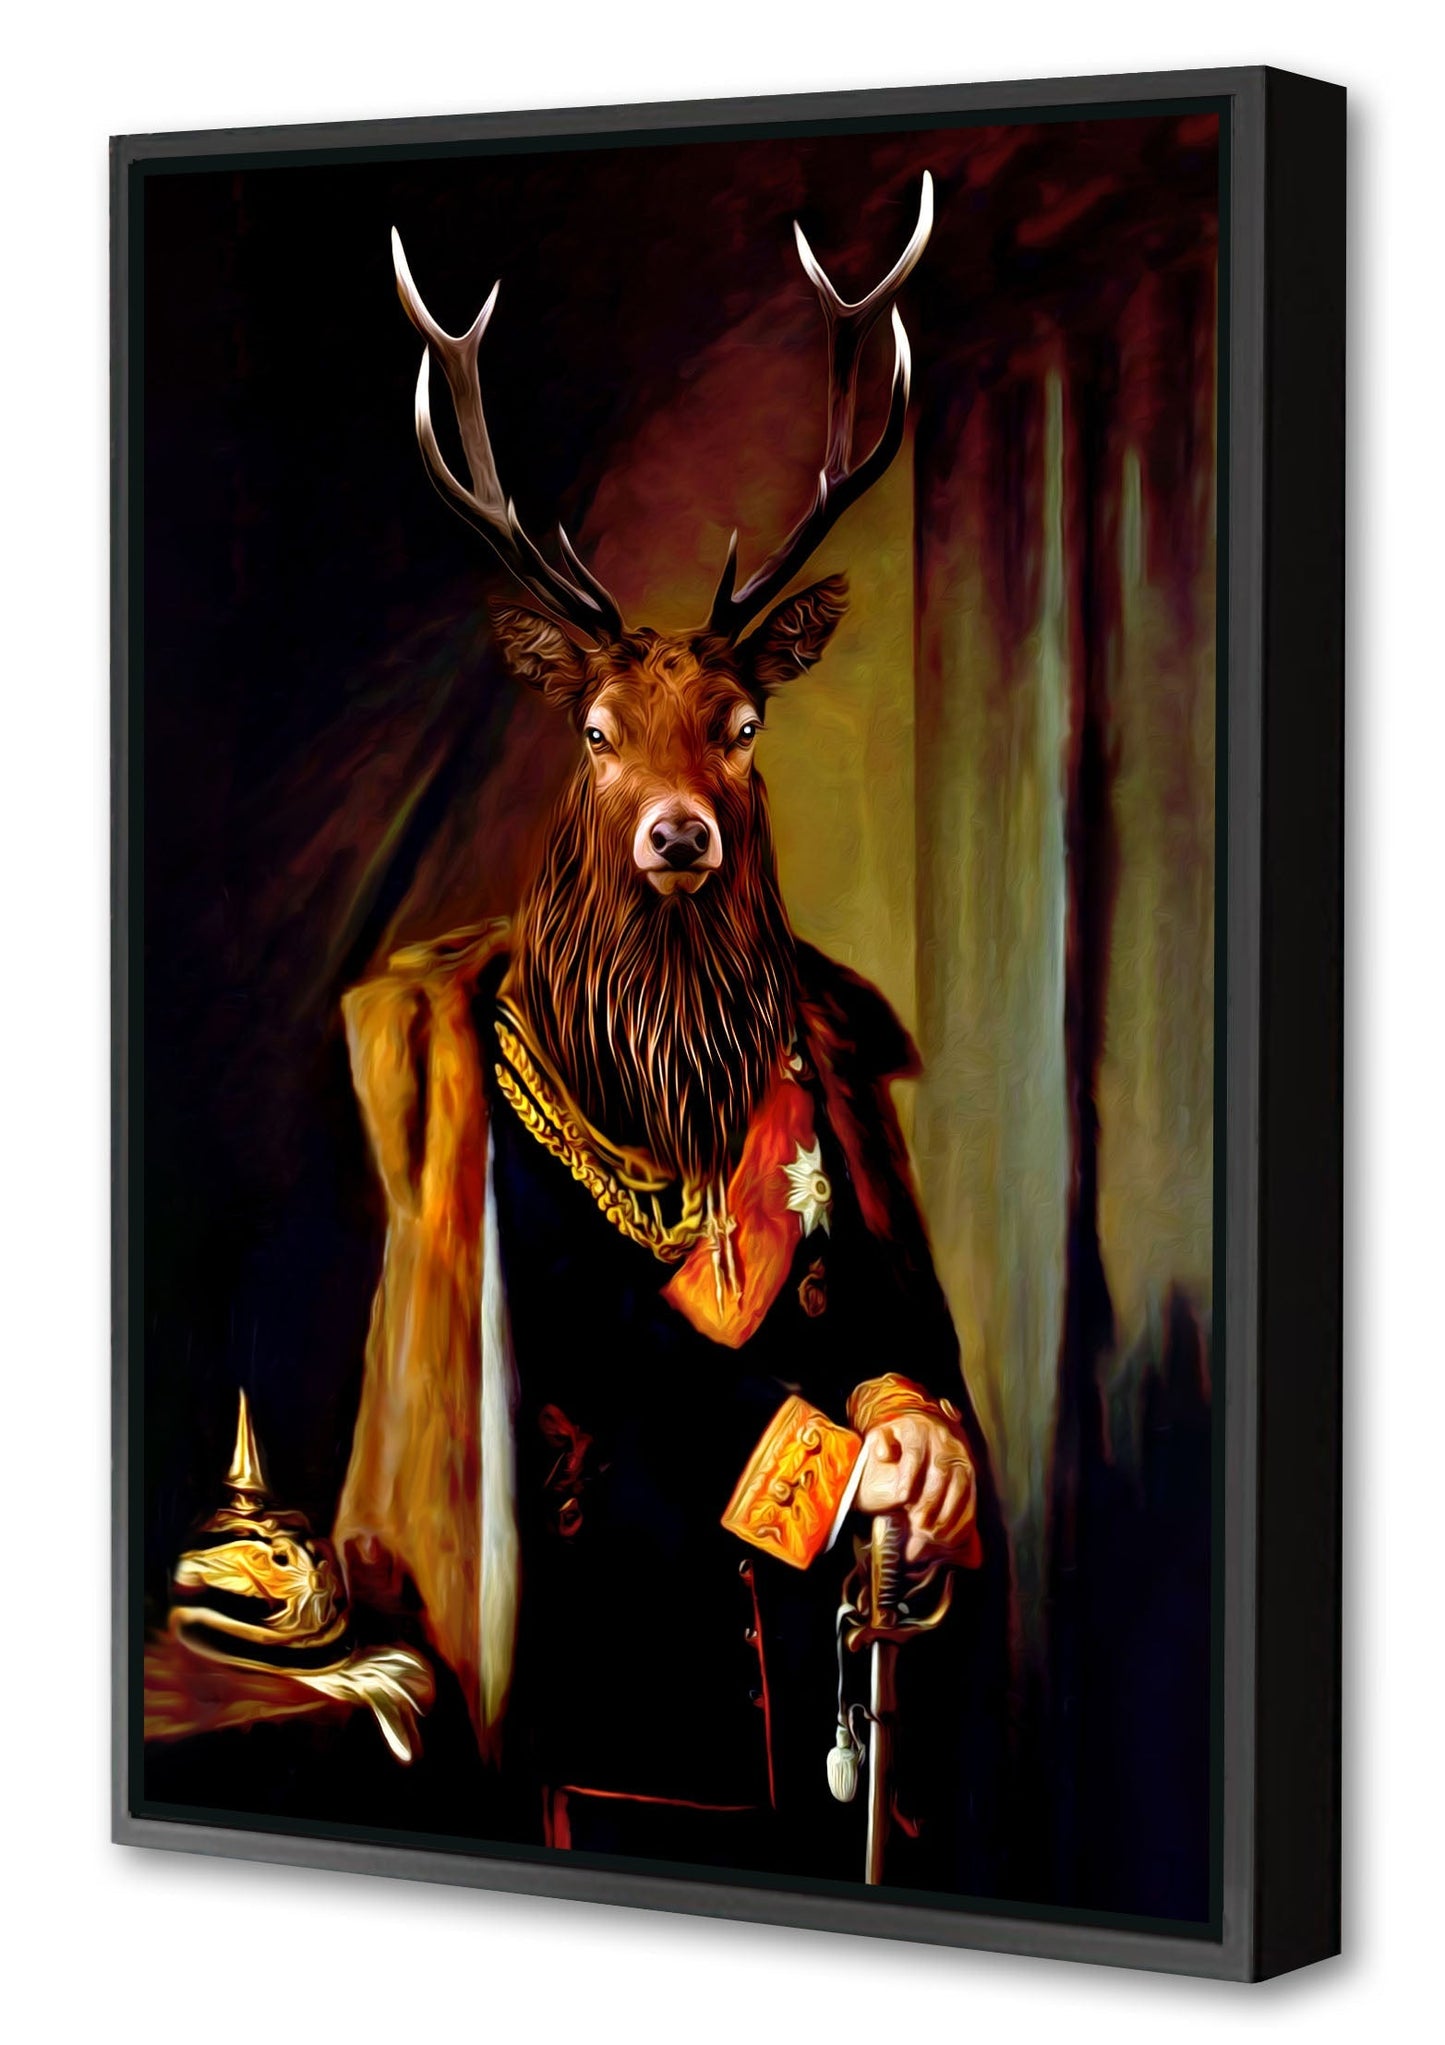 Stag-print, tein-lucasson-Canvas Print with Box Frame-40 x 60 cm-BLUE SHAKER